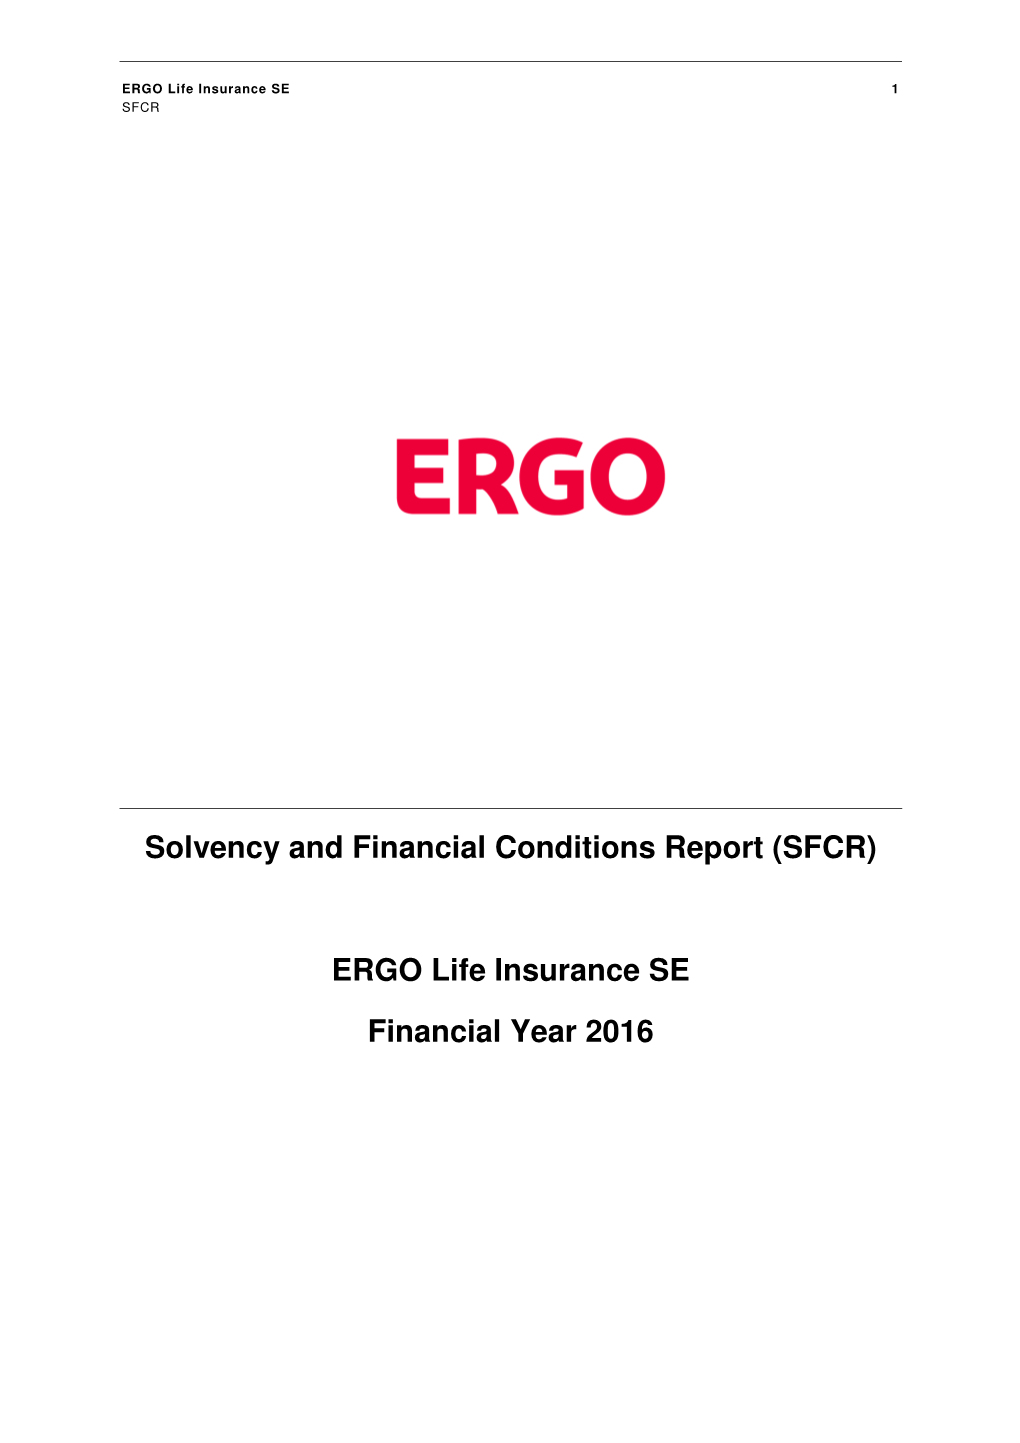 Solvency and Financial Conditions Report (SFCR) ERGO Life Insurance SE Financial Year 2016